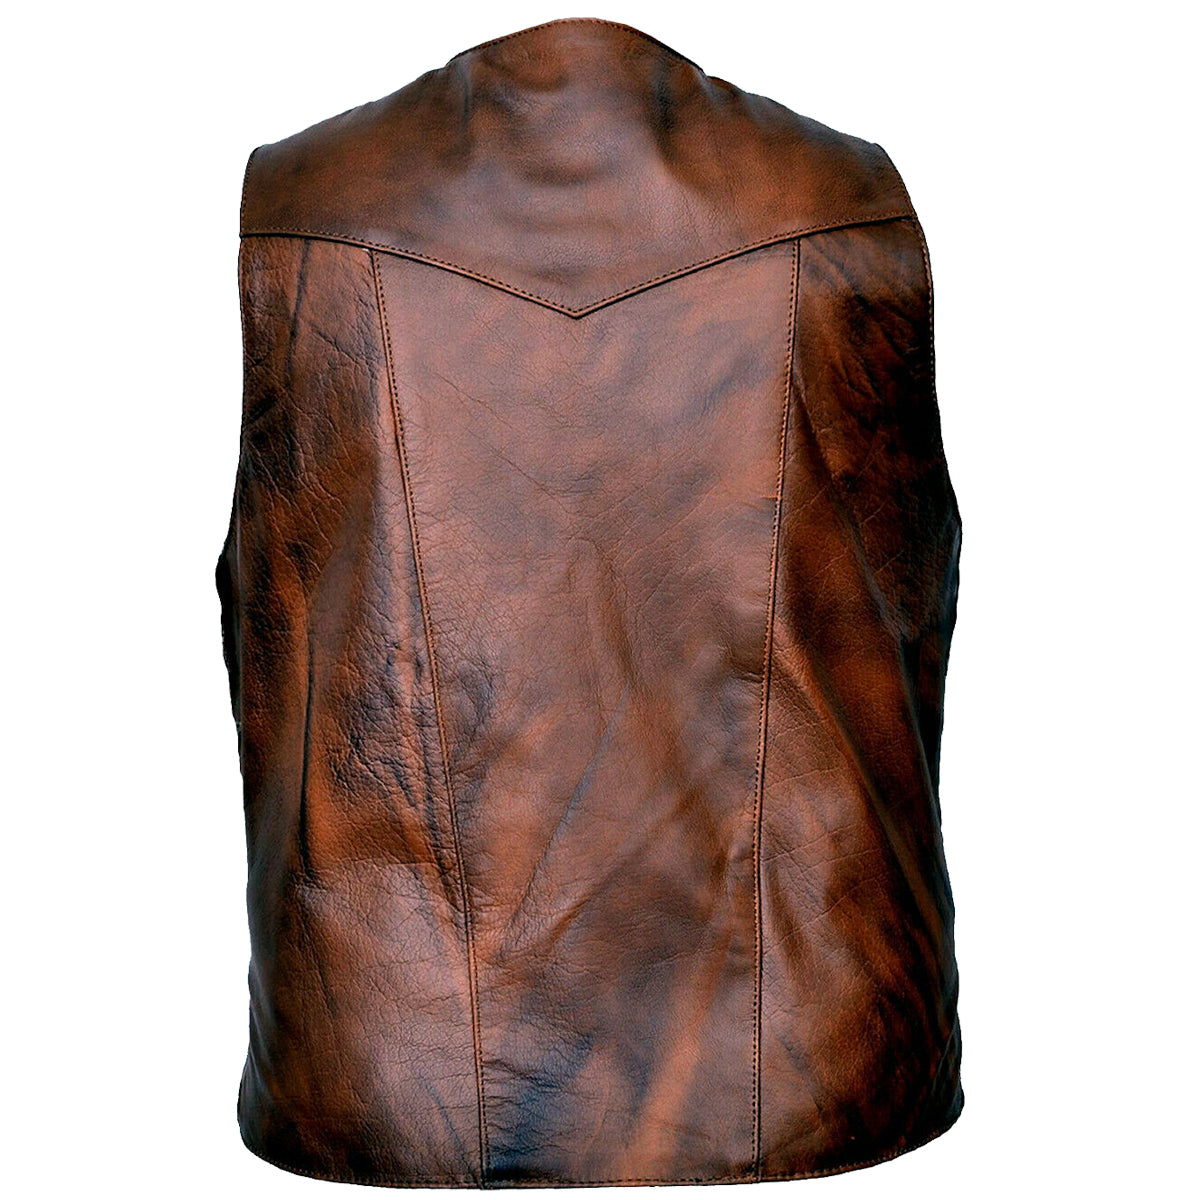 Men Wax Brown Cowhide Fashion Leather Vest - High Quality Leather Jackets For Sale | Dream Jackets On Jackethunt